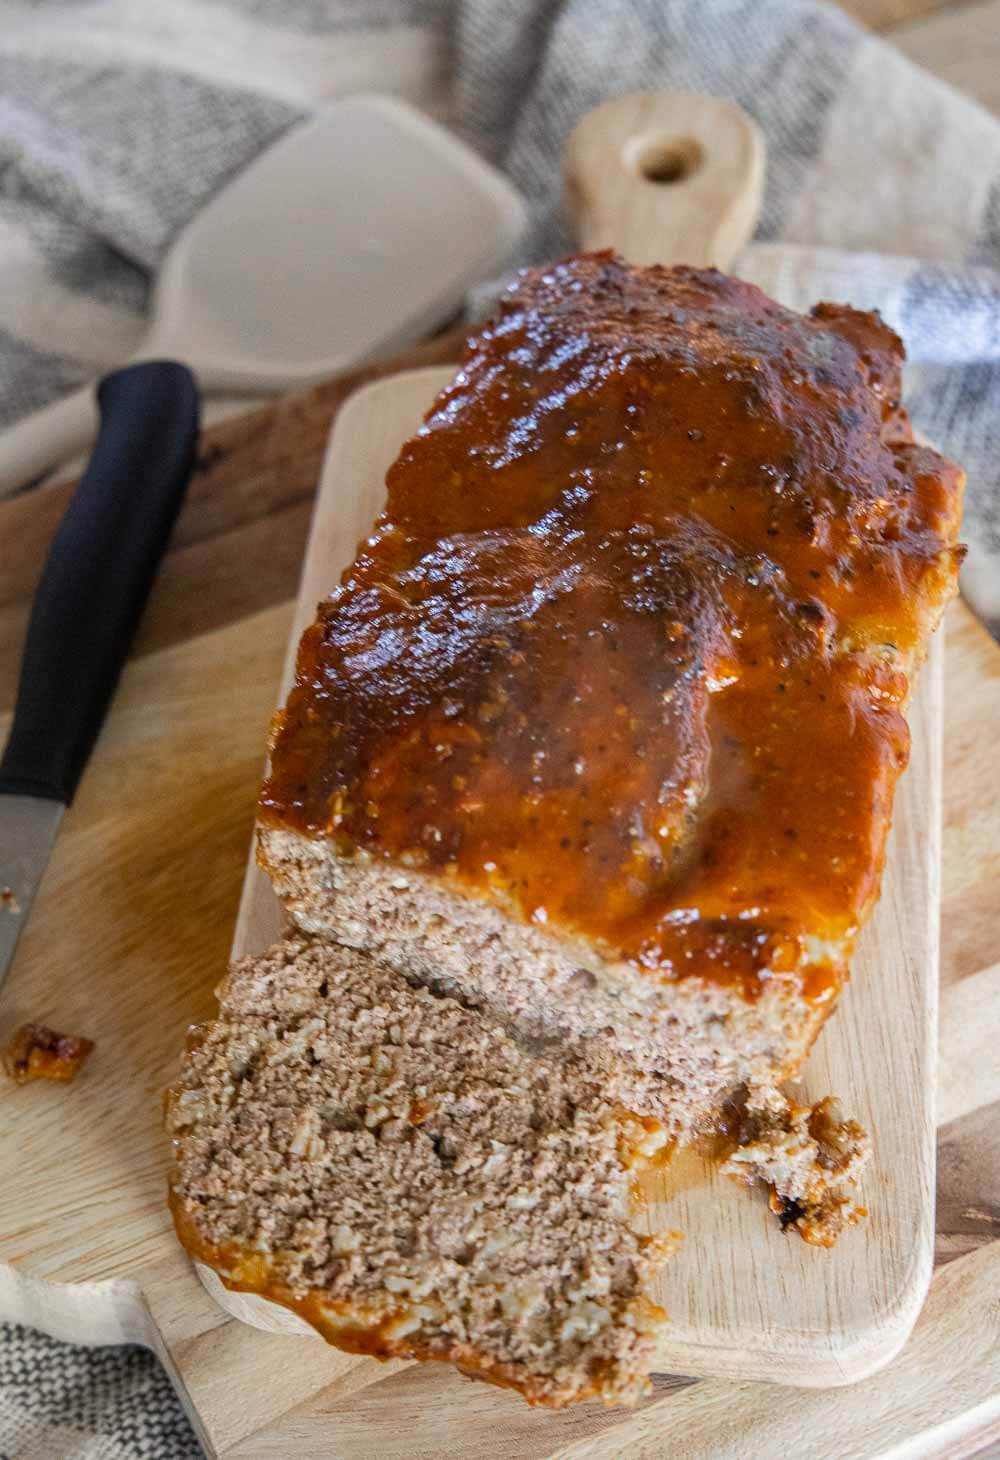 Easy Meatloaf Recipe with Just a Few Ingredients